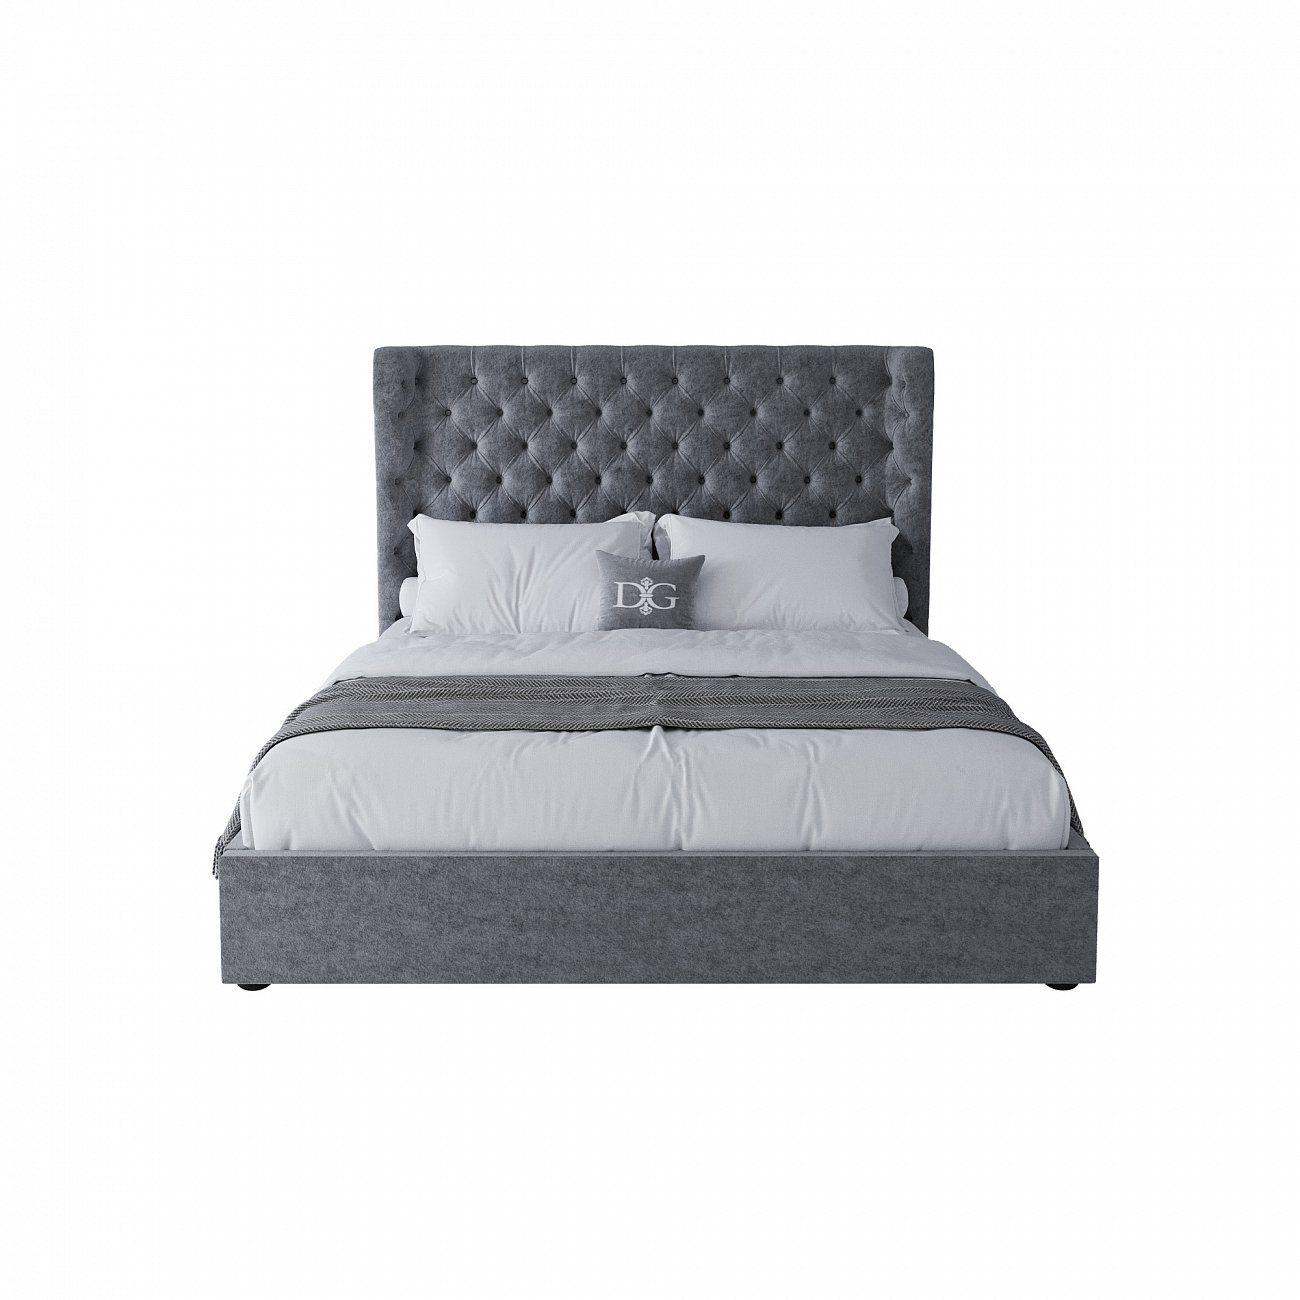 Double bed 180x200 cm grey Henbord, straight base